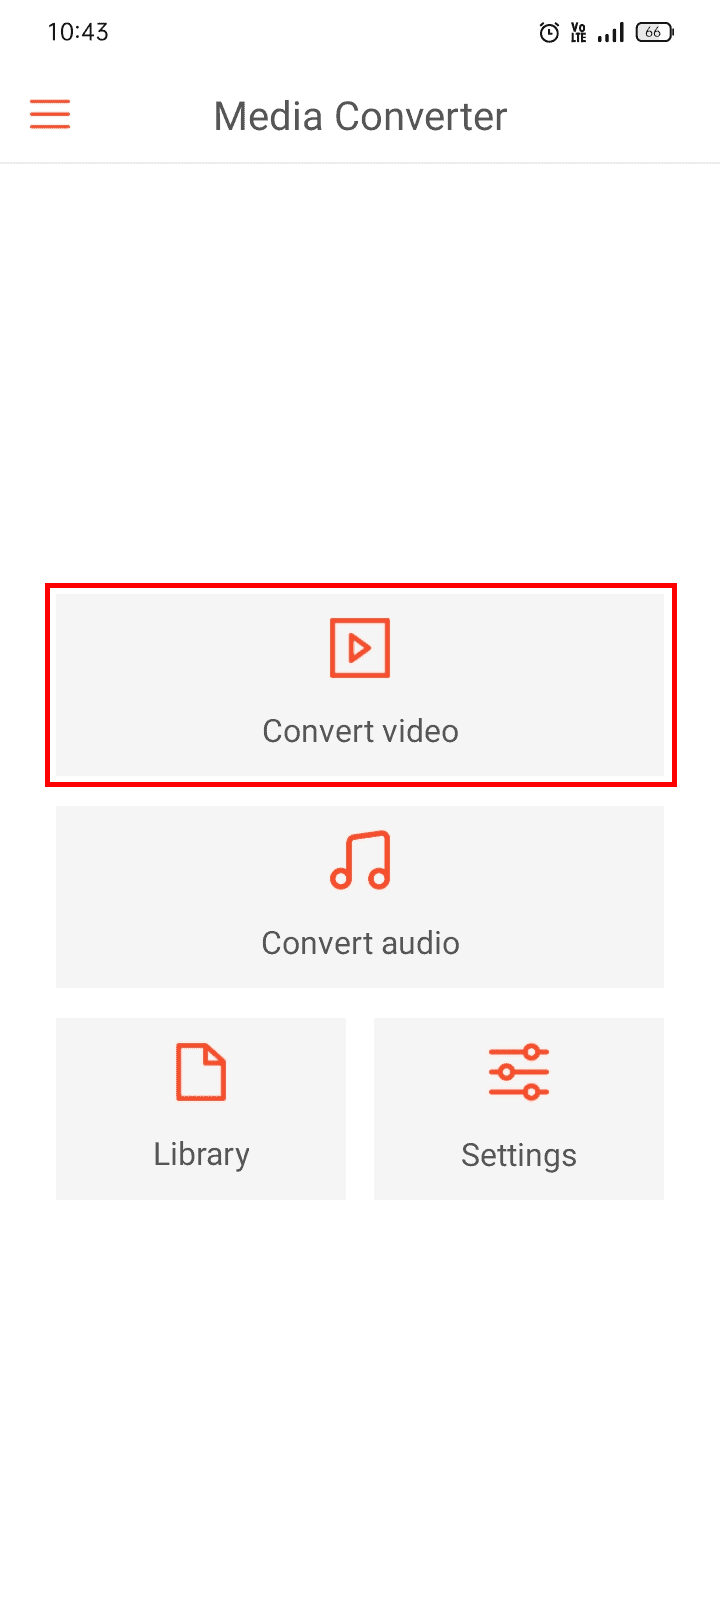 Tap on the Convert video option.